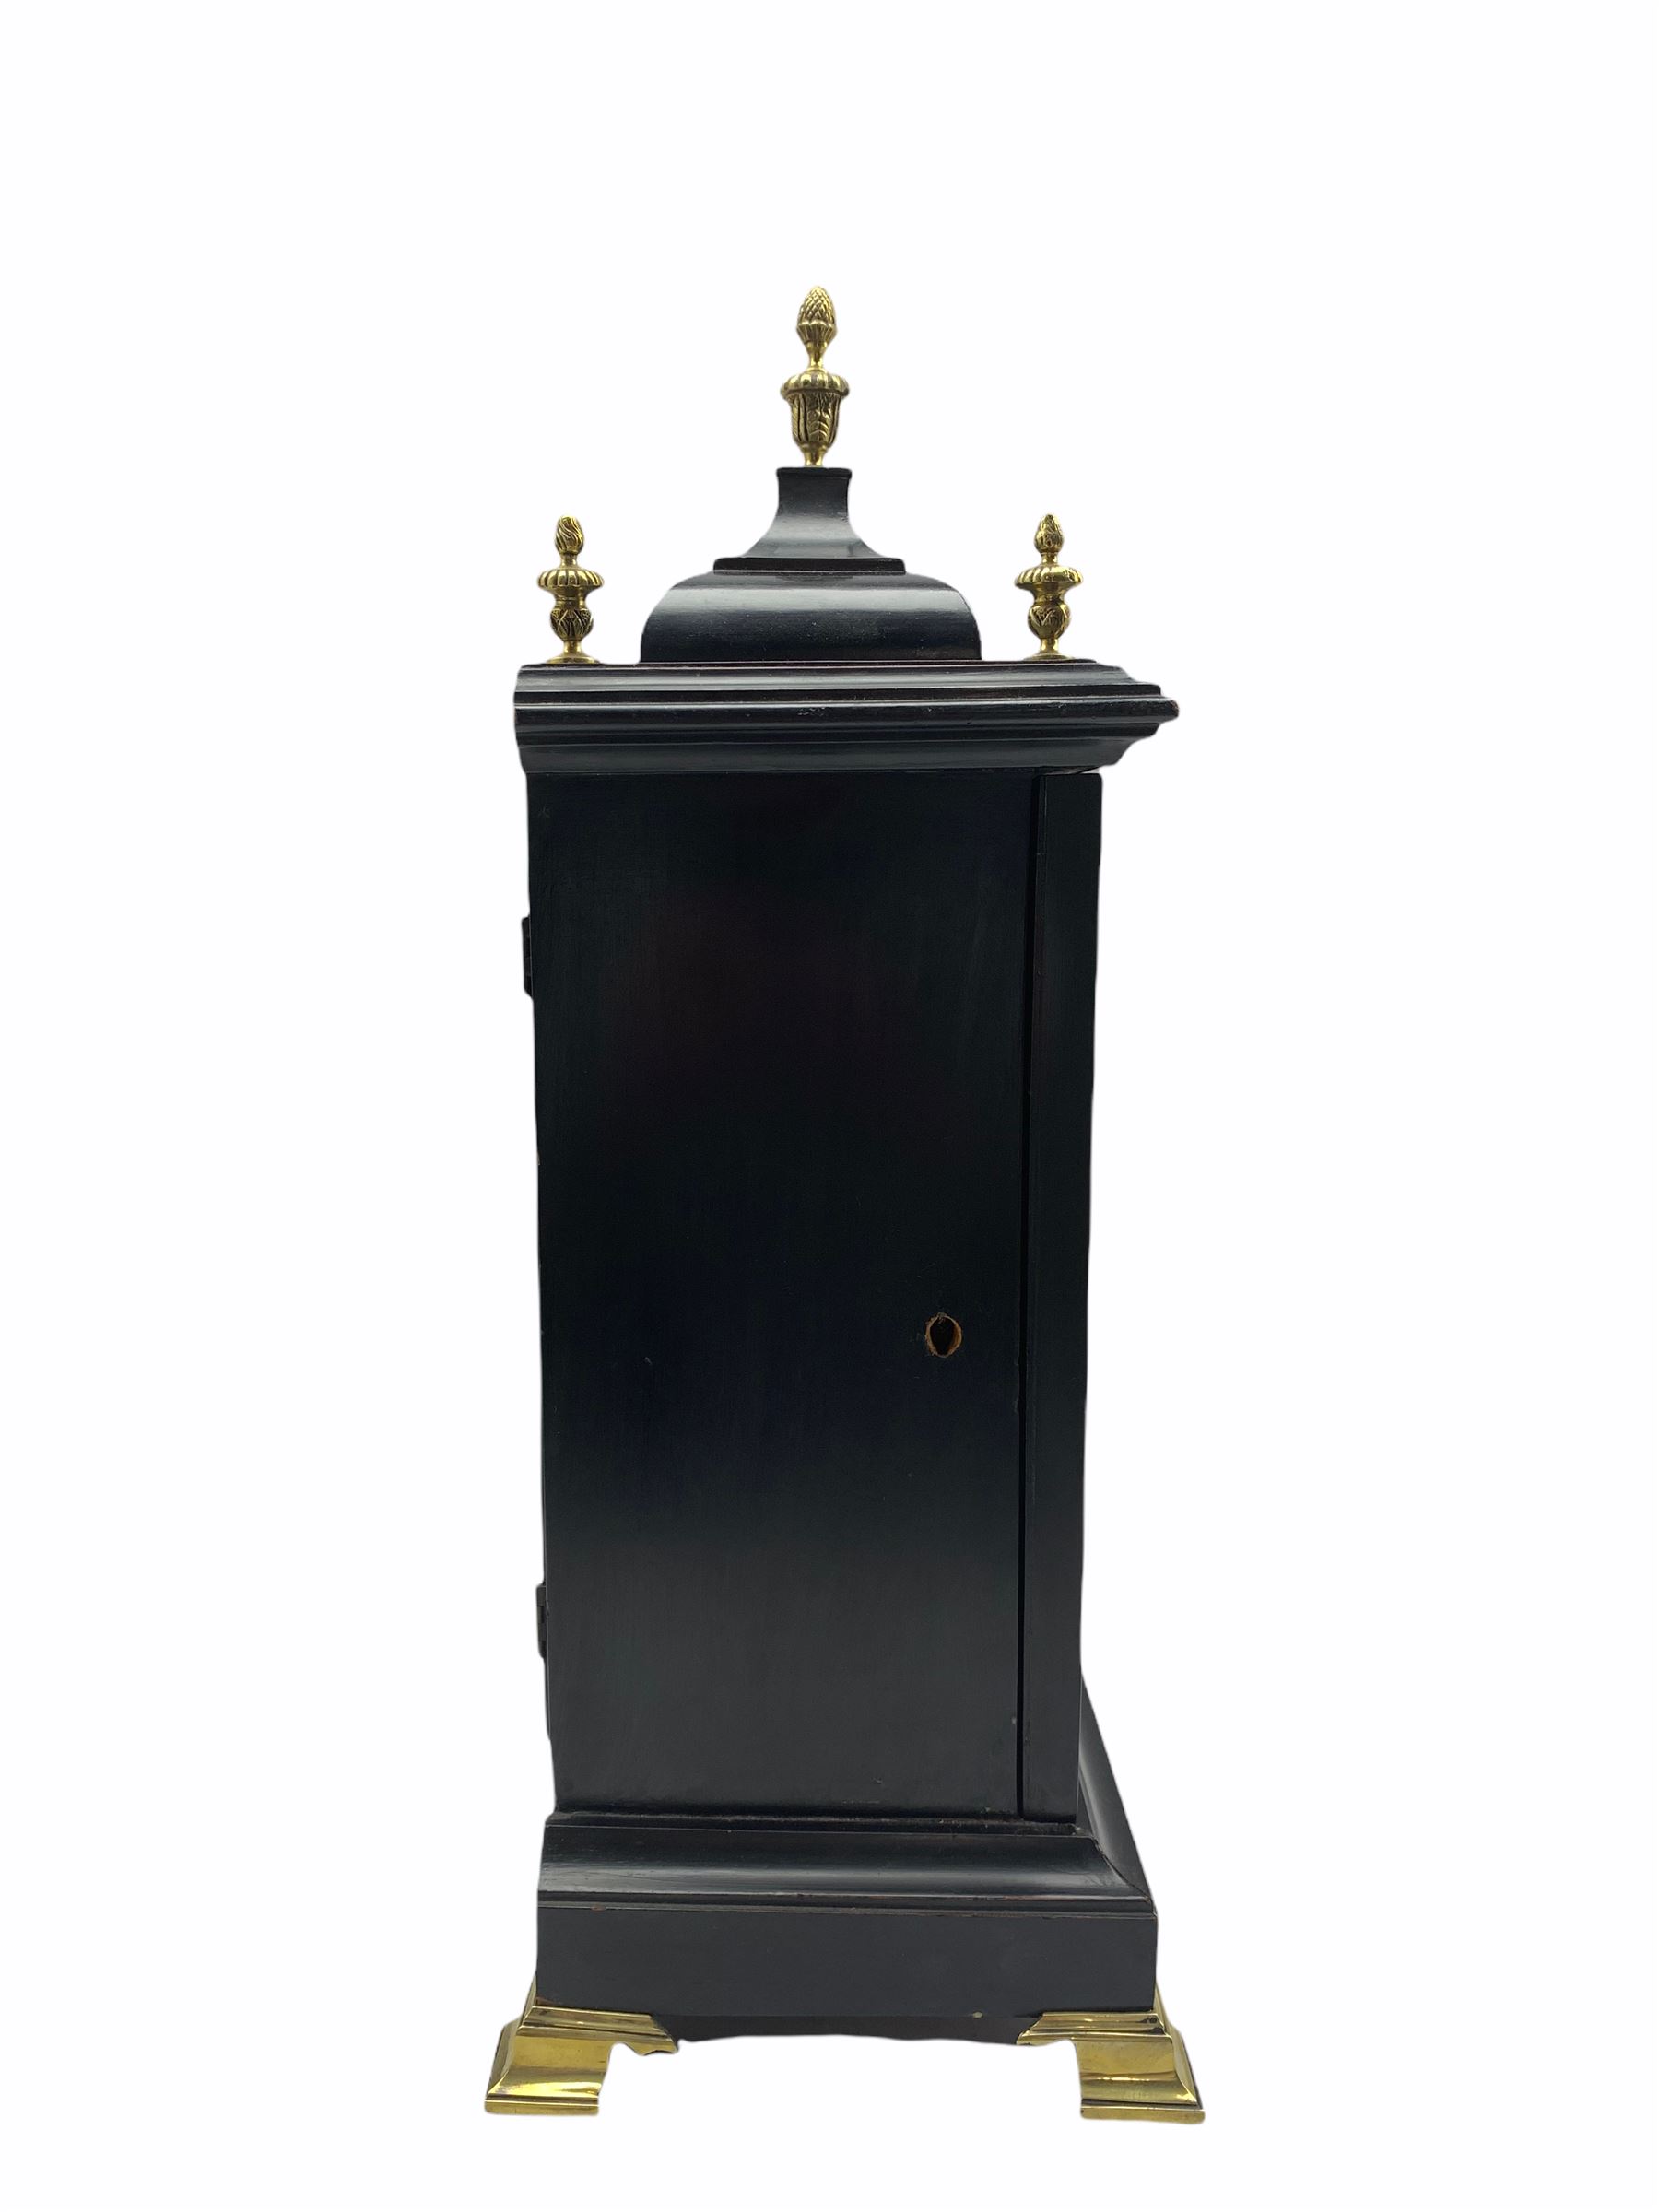 Early 20th century eight-day ebonised German bracket clock with a two train striking movement - Image 2 of 5